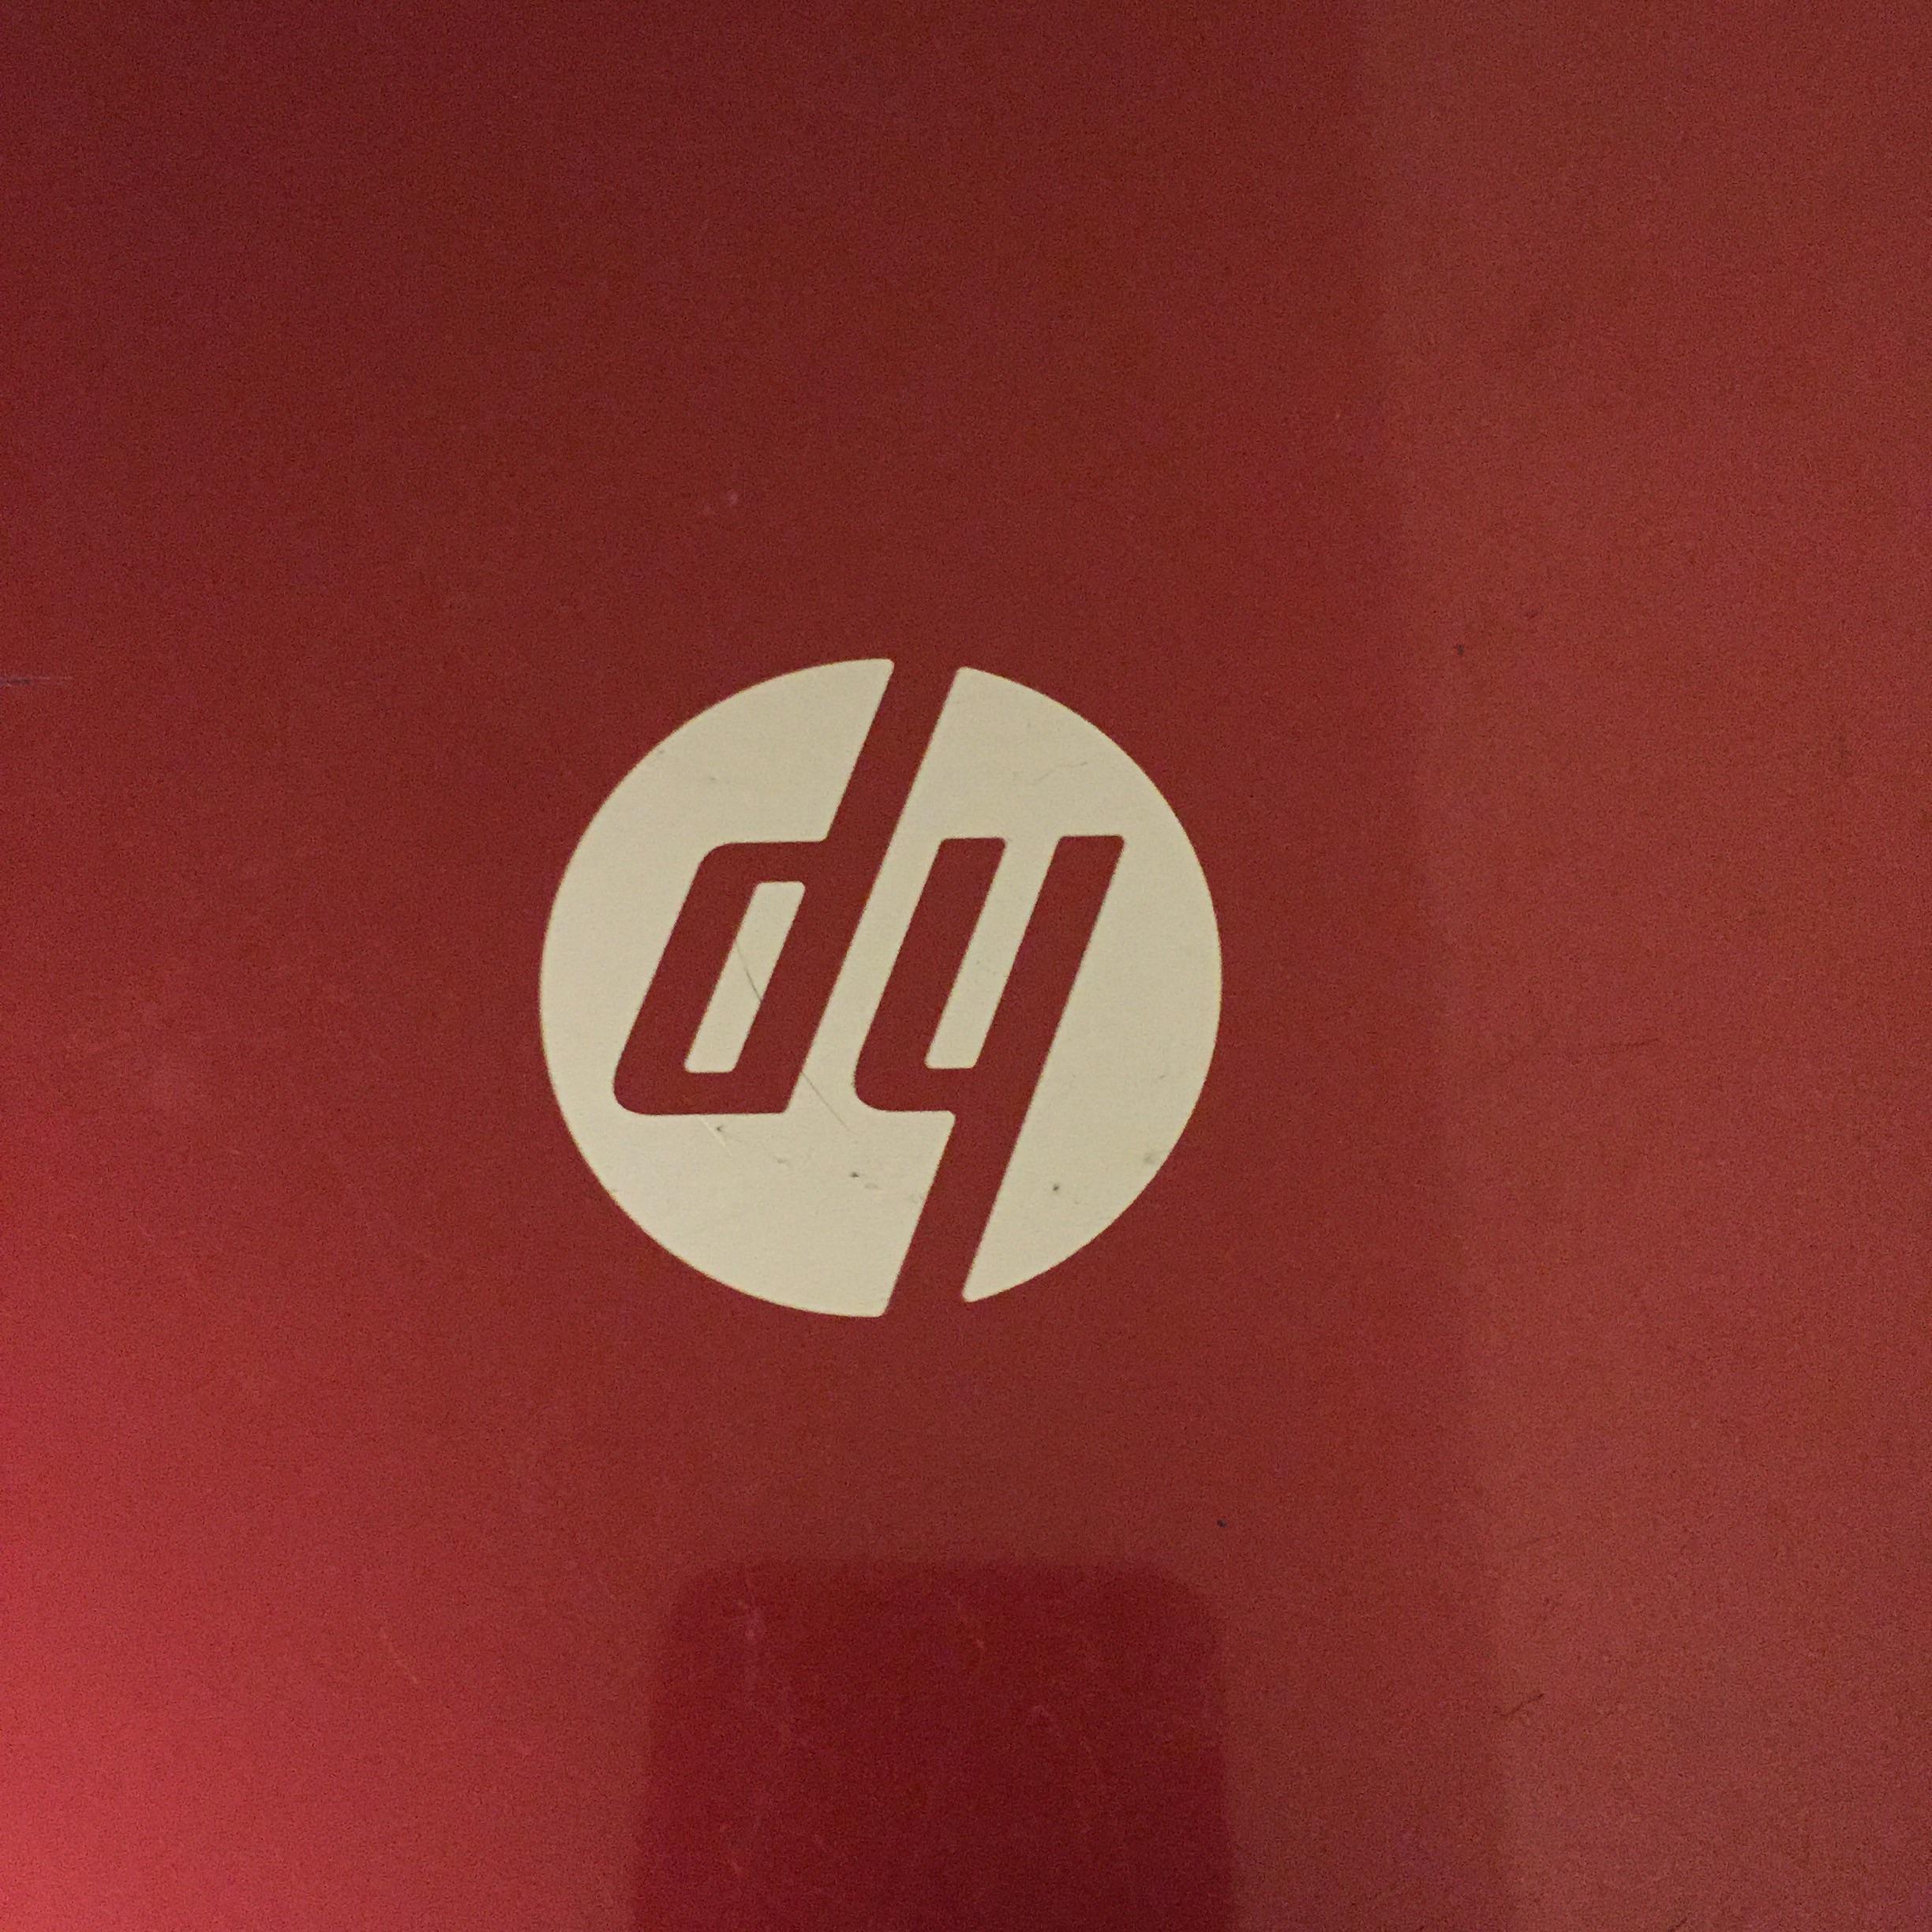 Red HP Logo - Just noticed the HP logo upside down turns into D4 : Crewniverse